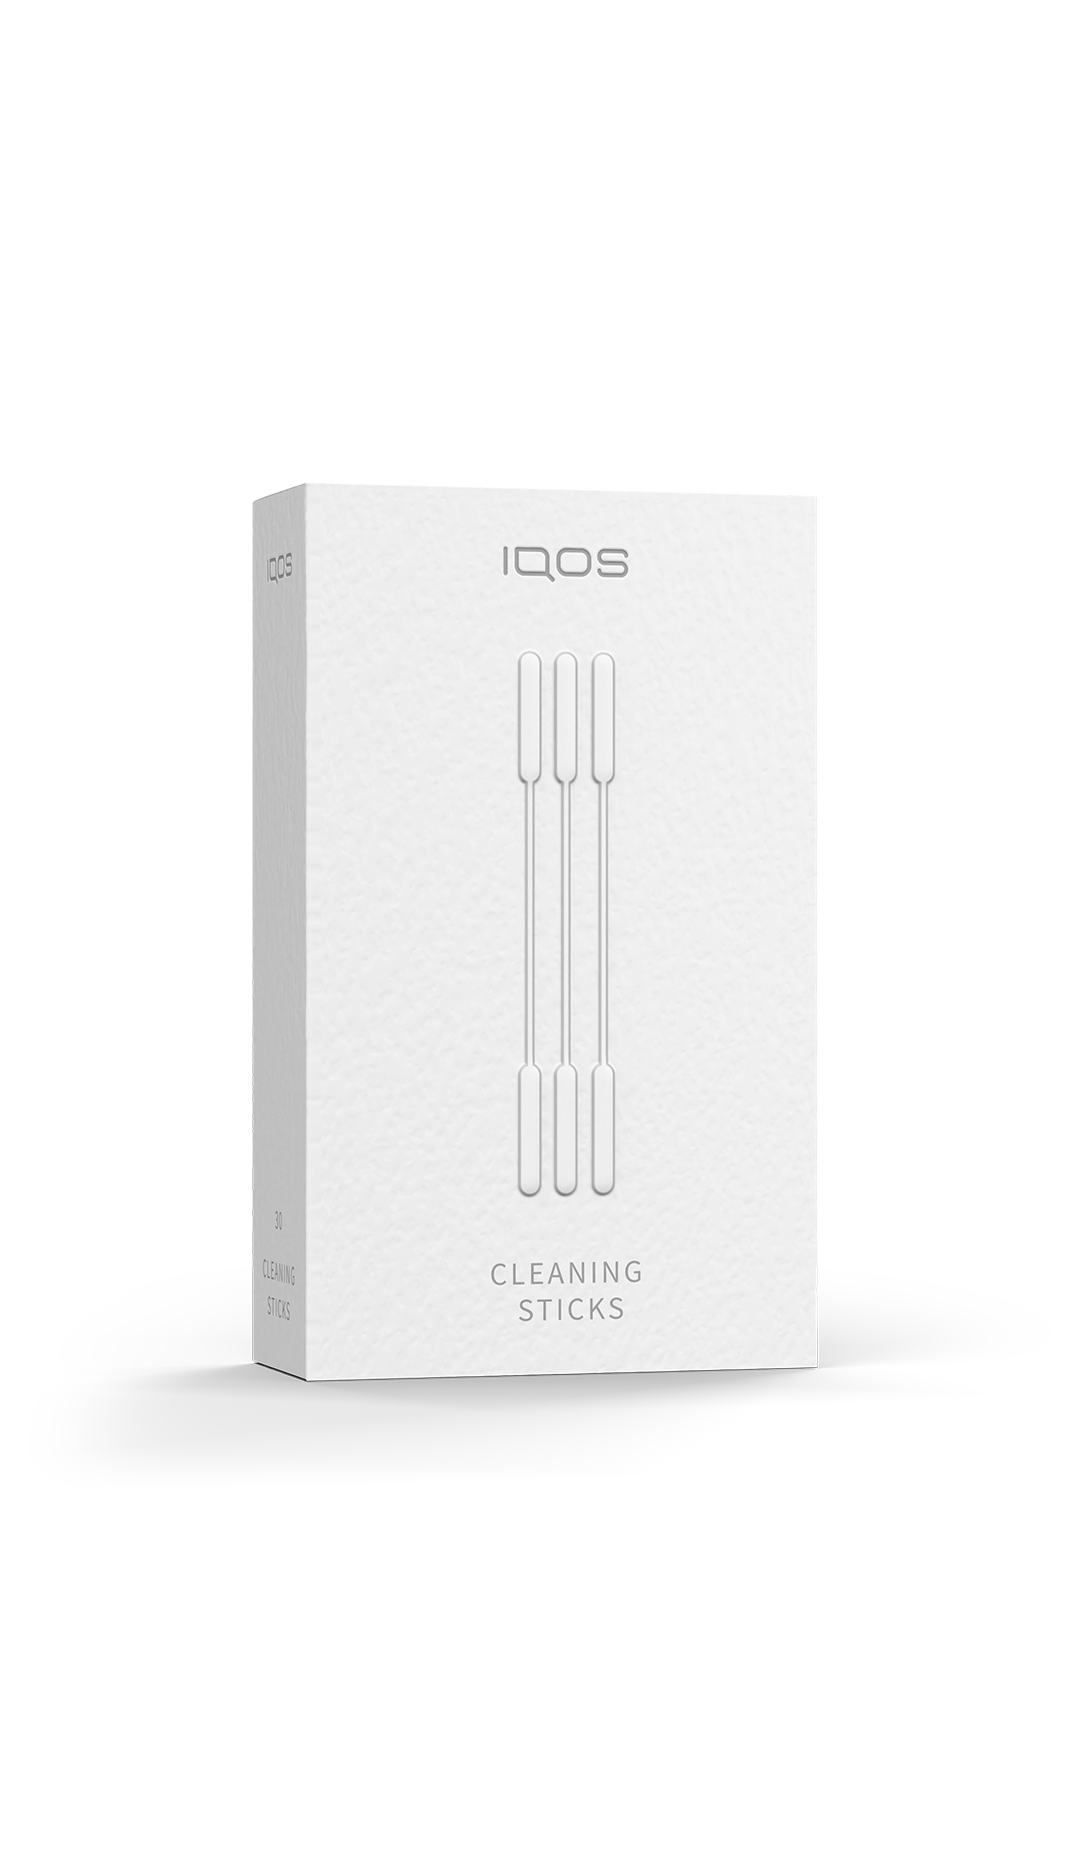 30% OFF] IQOS CLEANING STICKS - Pack of 30 in Dubai, Abu Dhabi and UAE